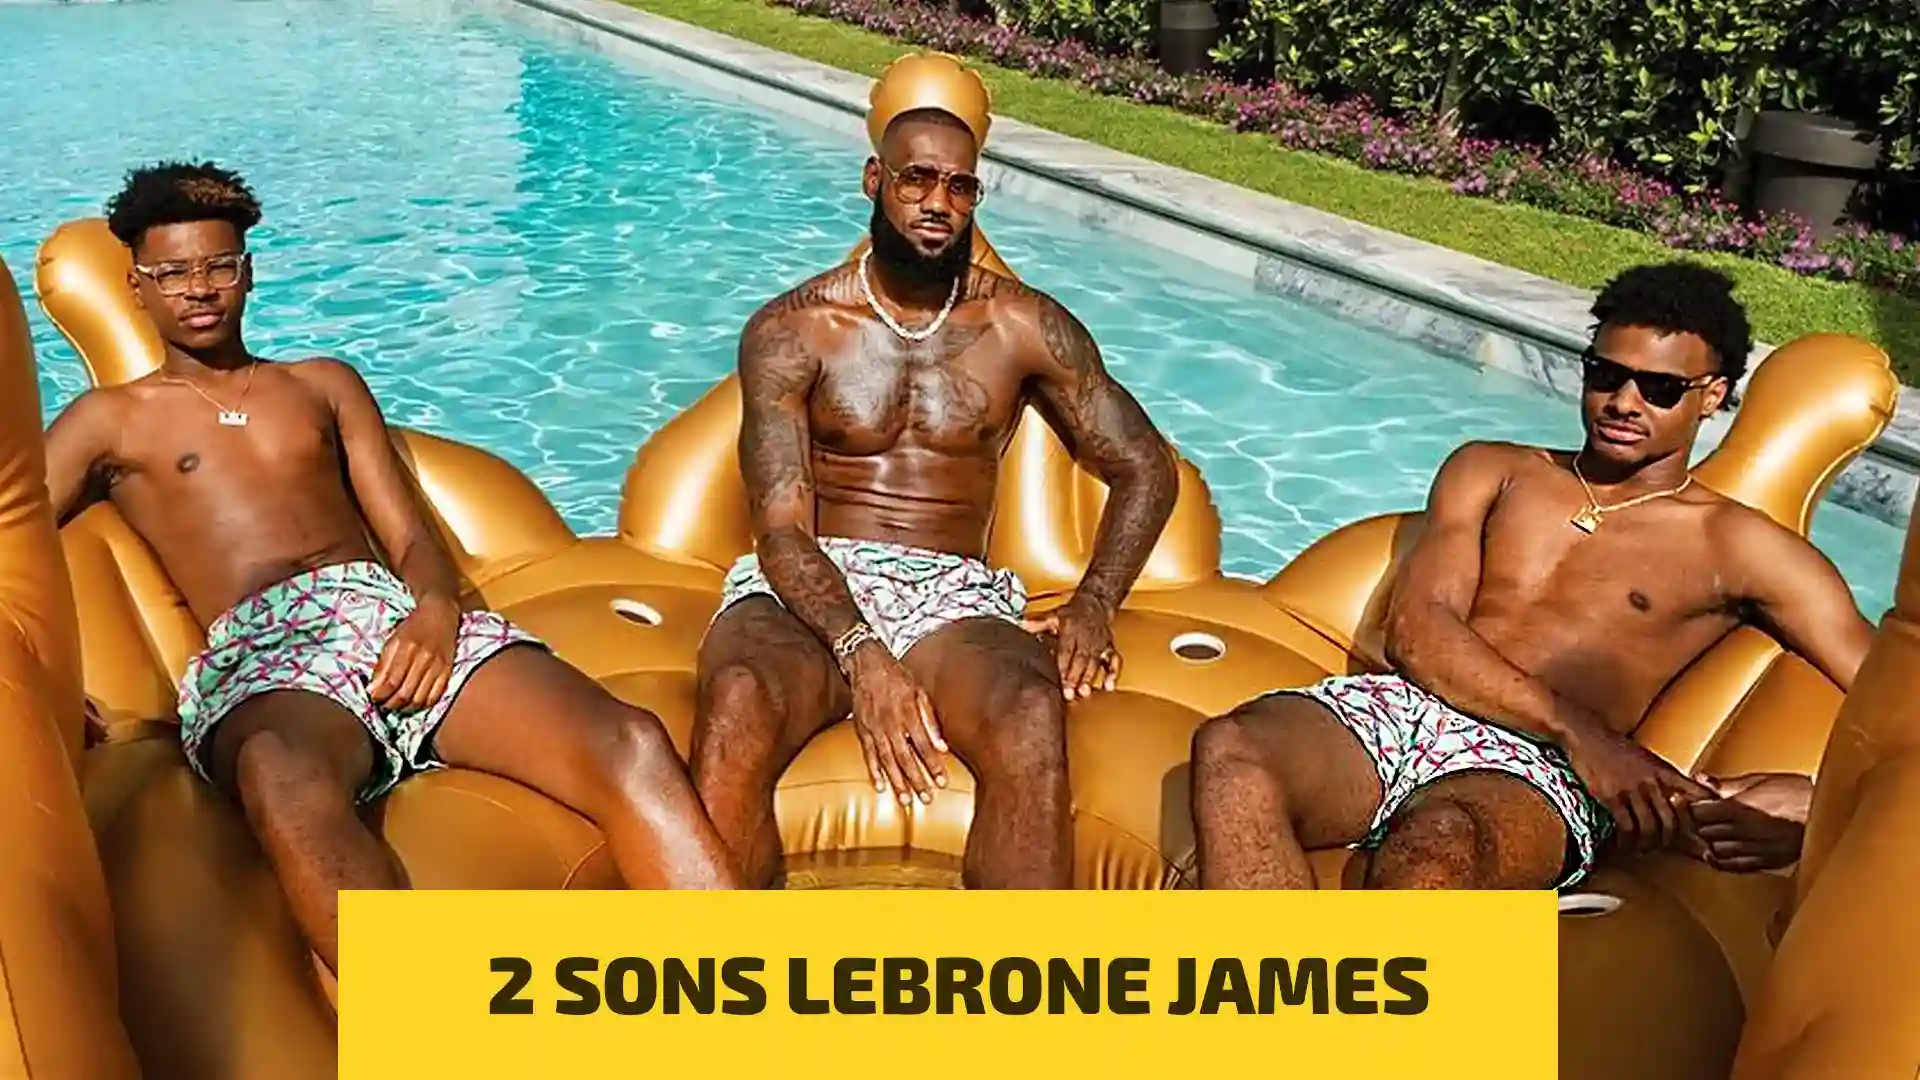 2 sons Lebrone james